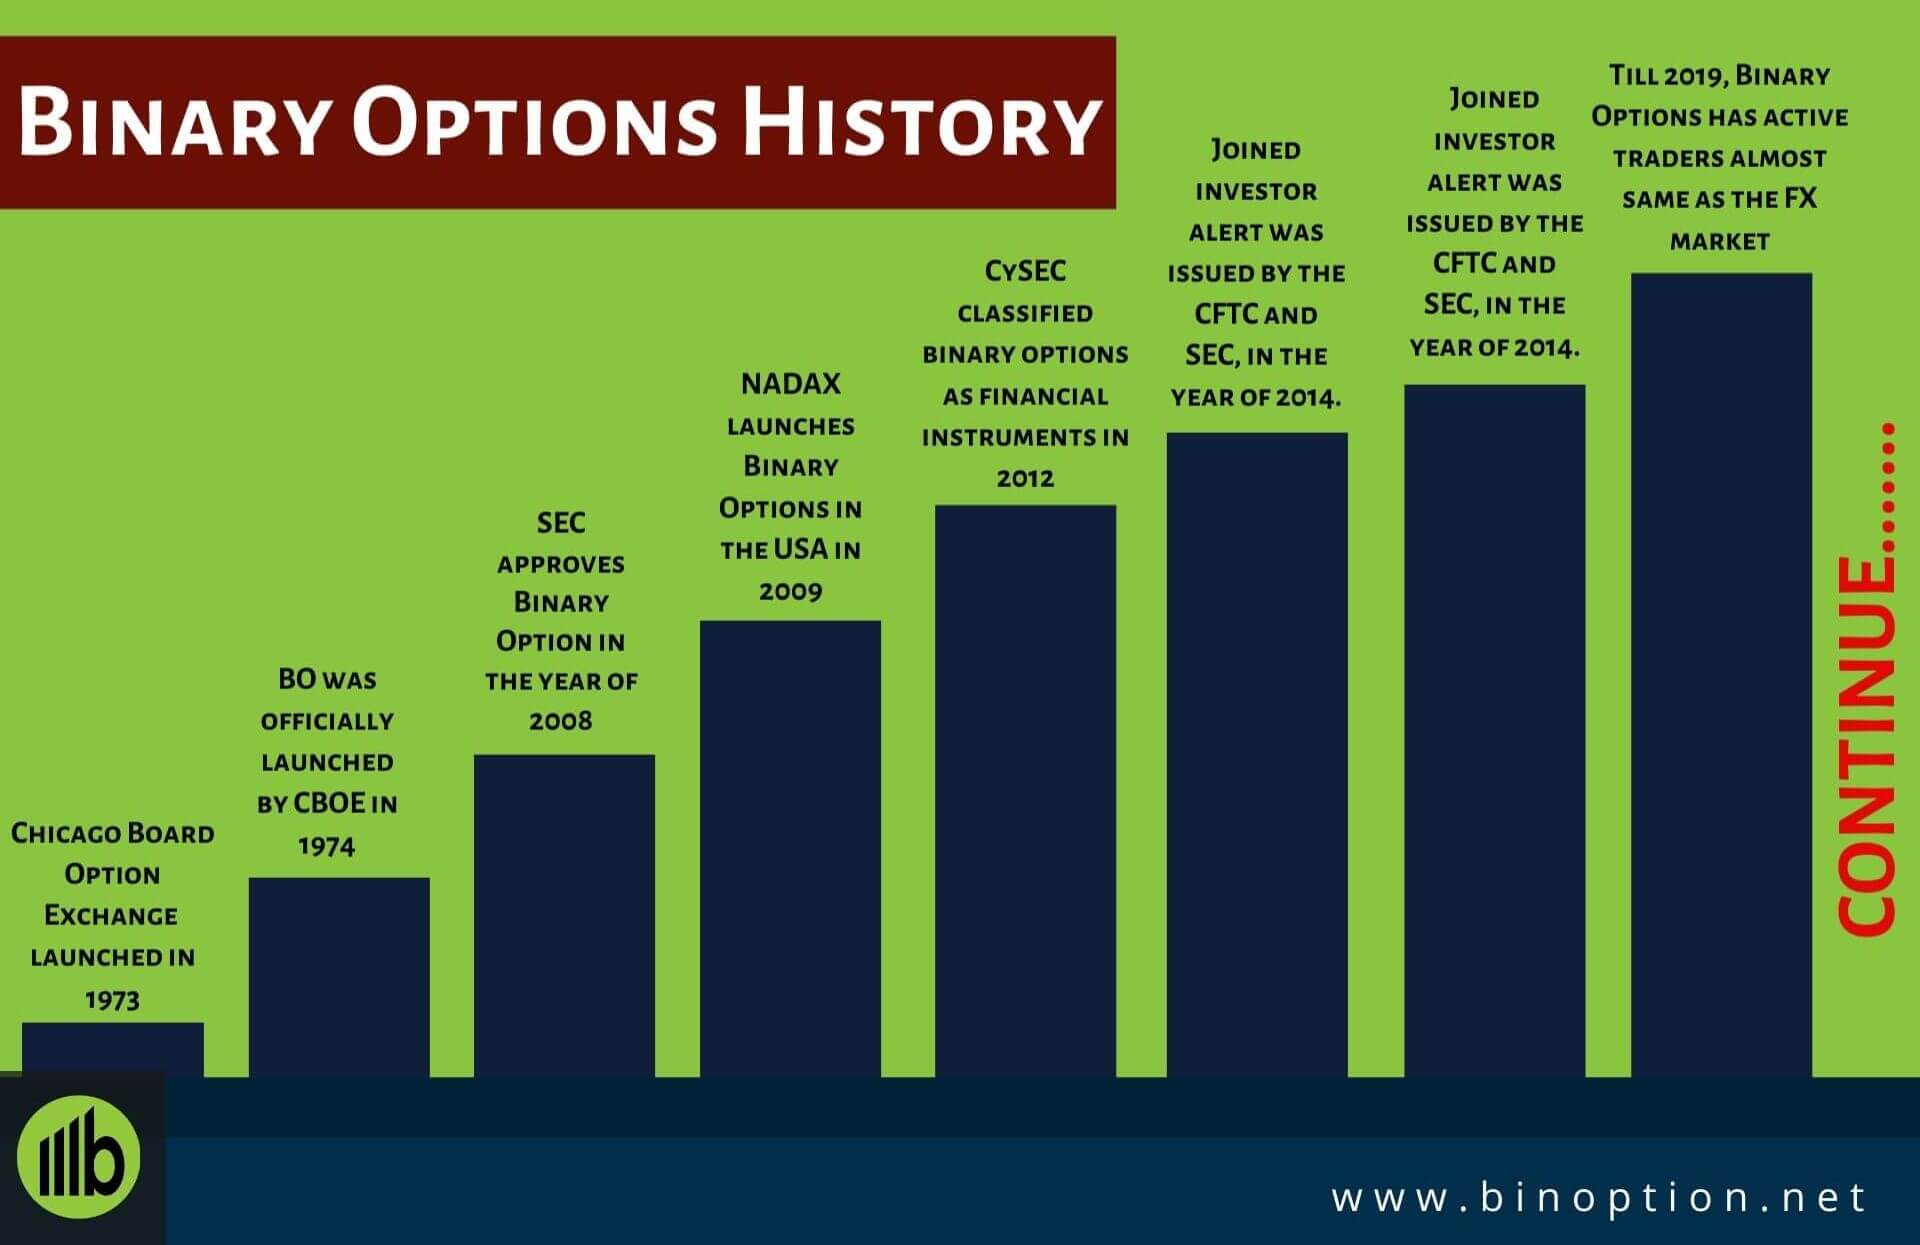 Who invented binary options